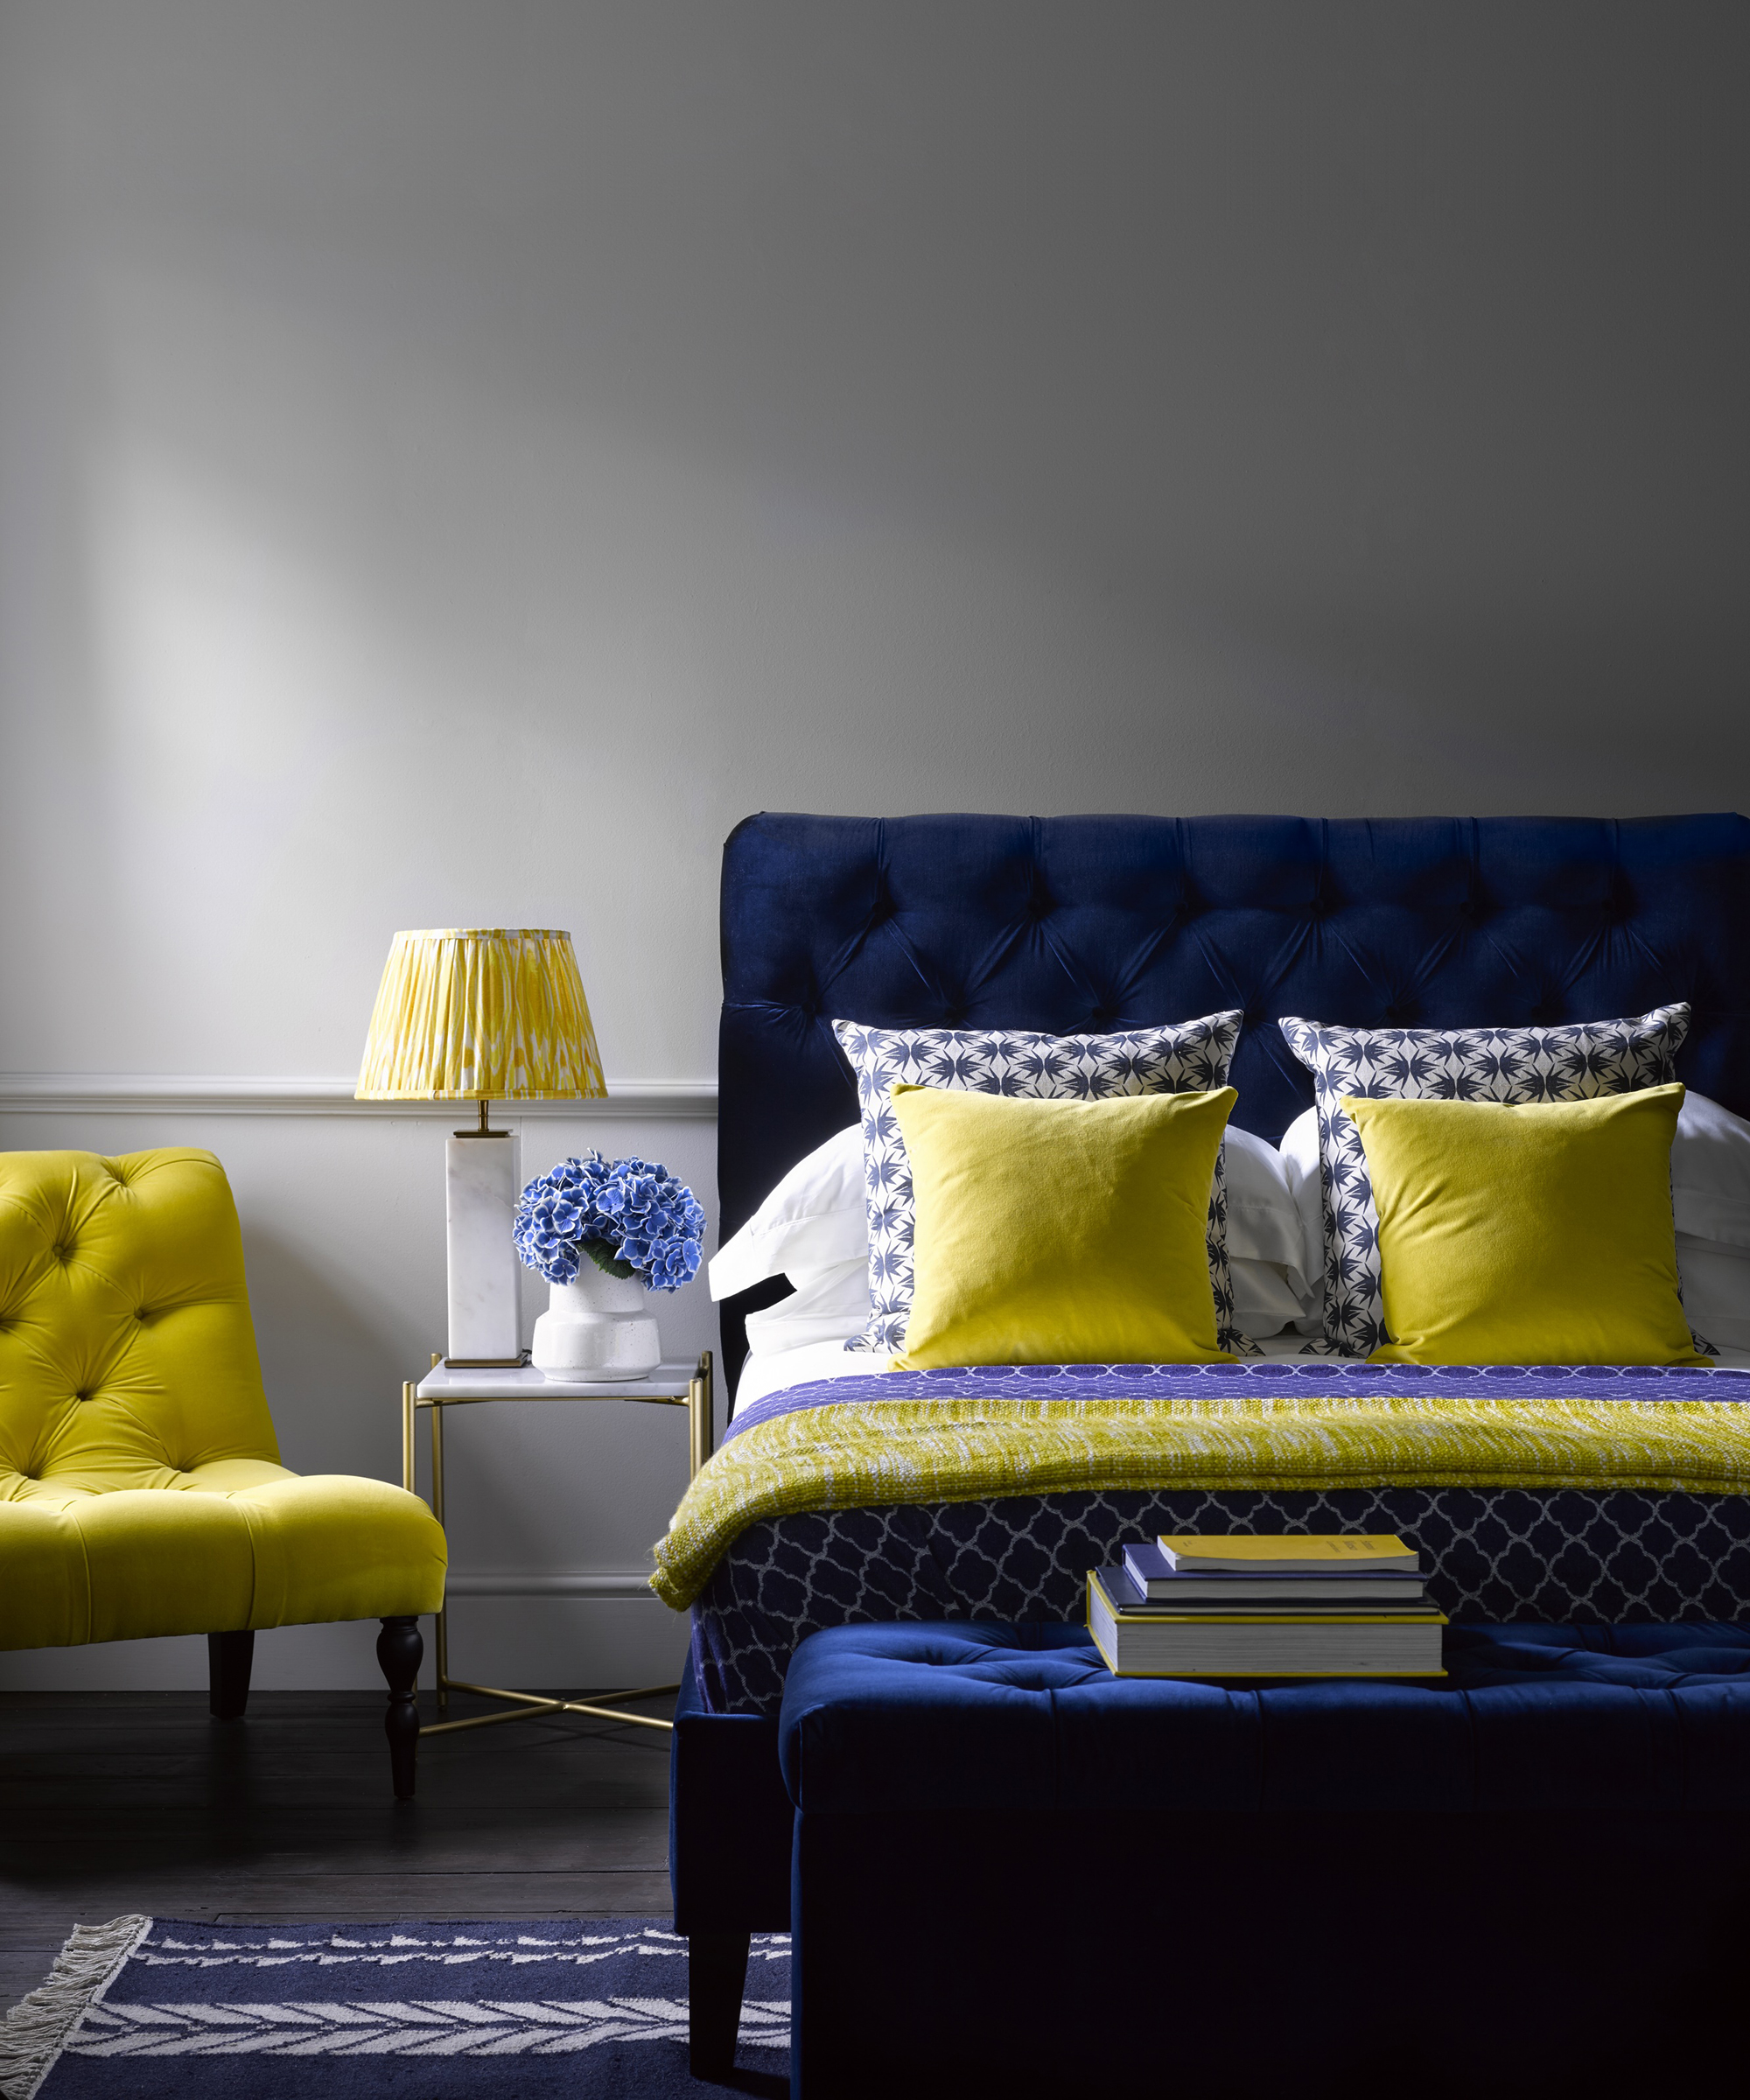 Navy blue and yellow bedroom decor by Sofa.com